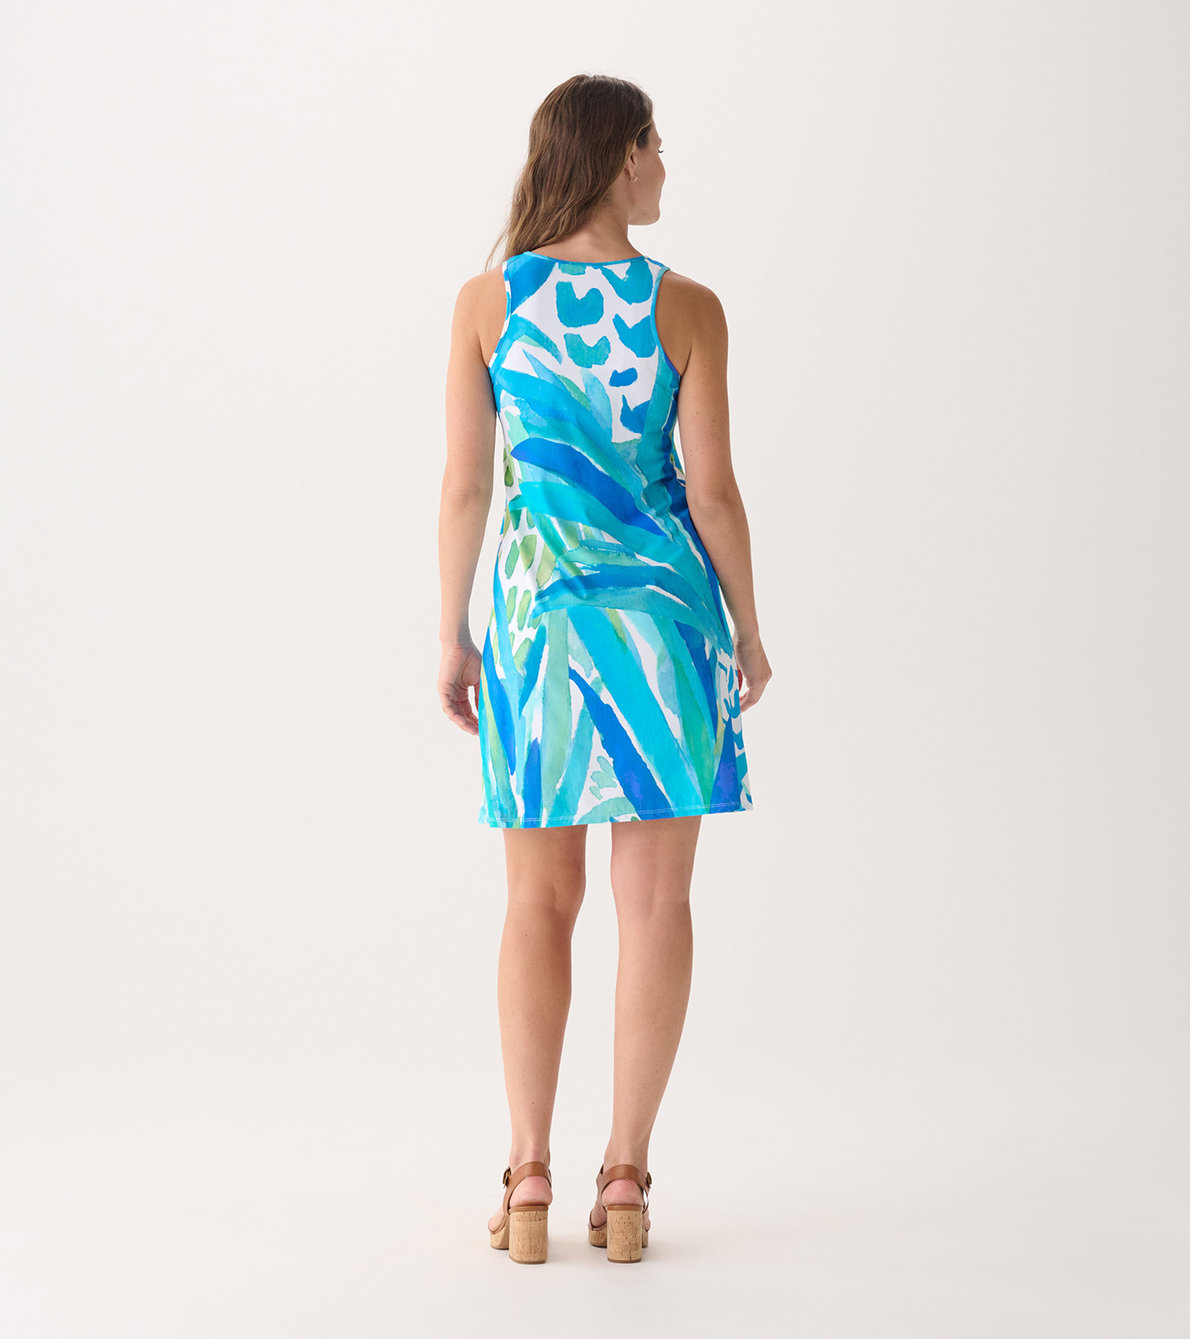 View larger image of Women's Painted Pineapple Summer Dress